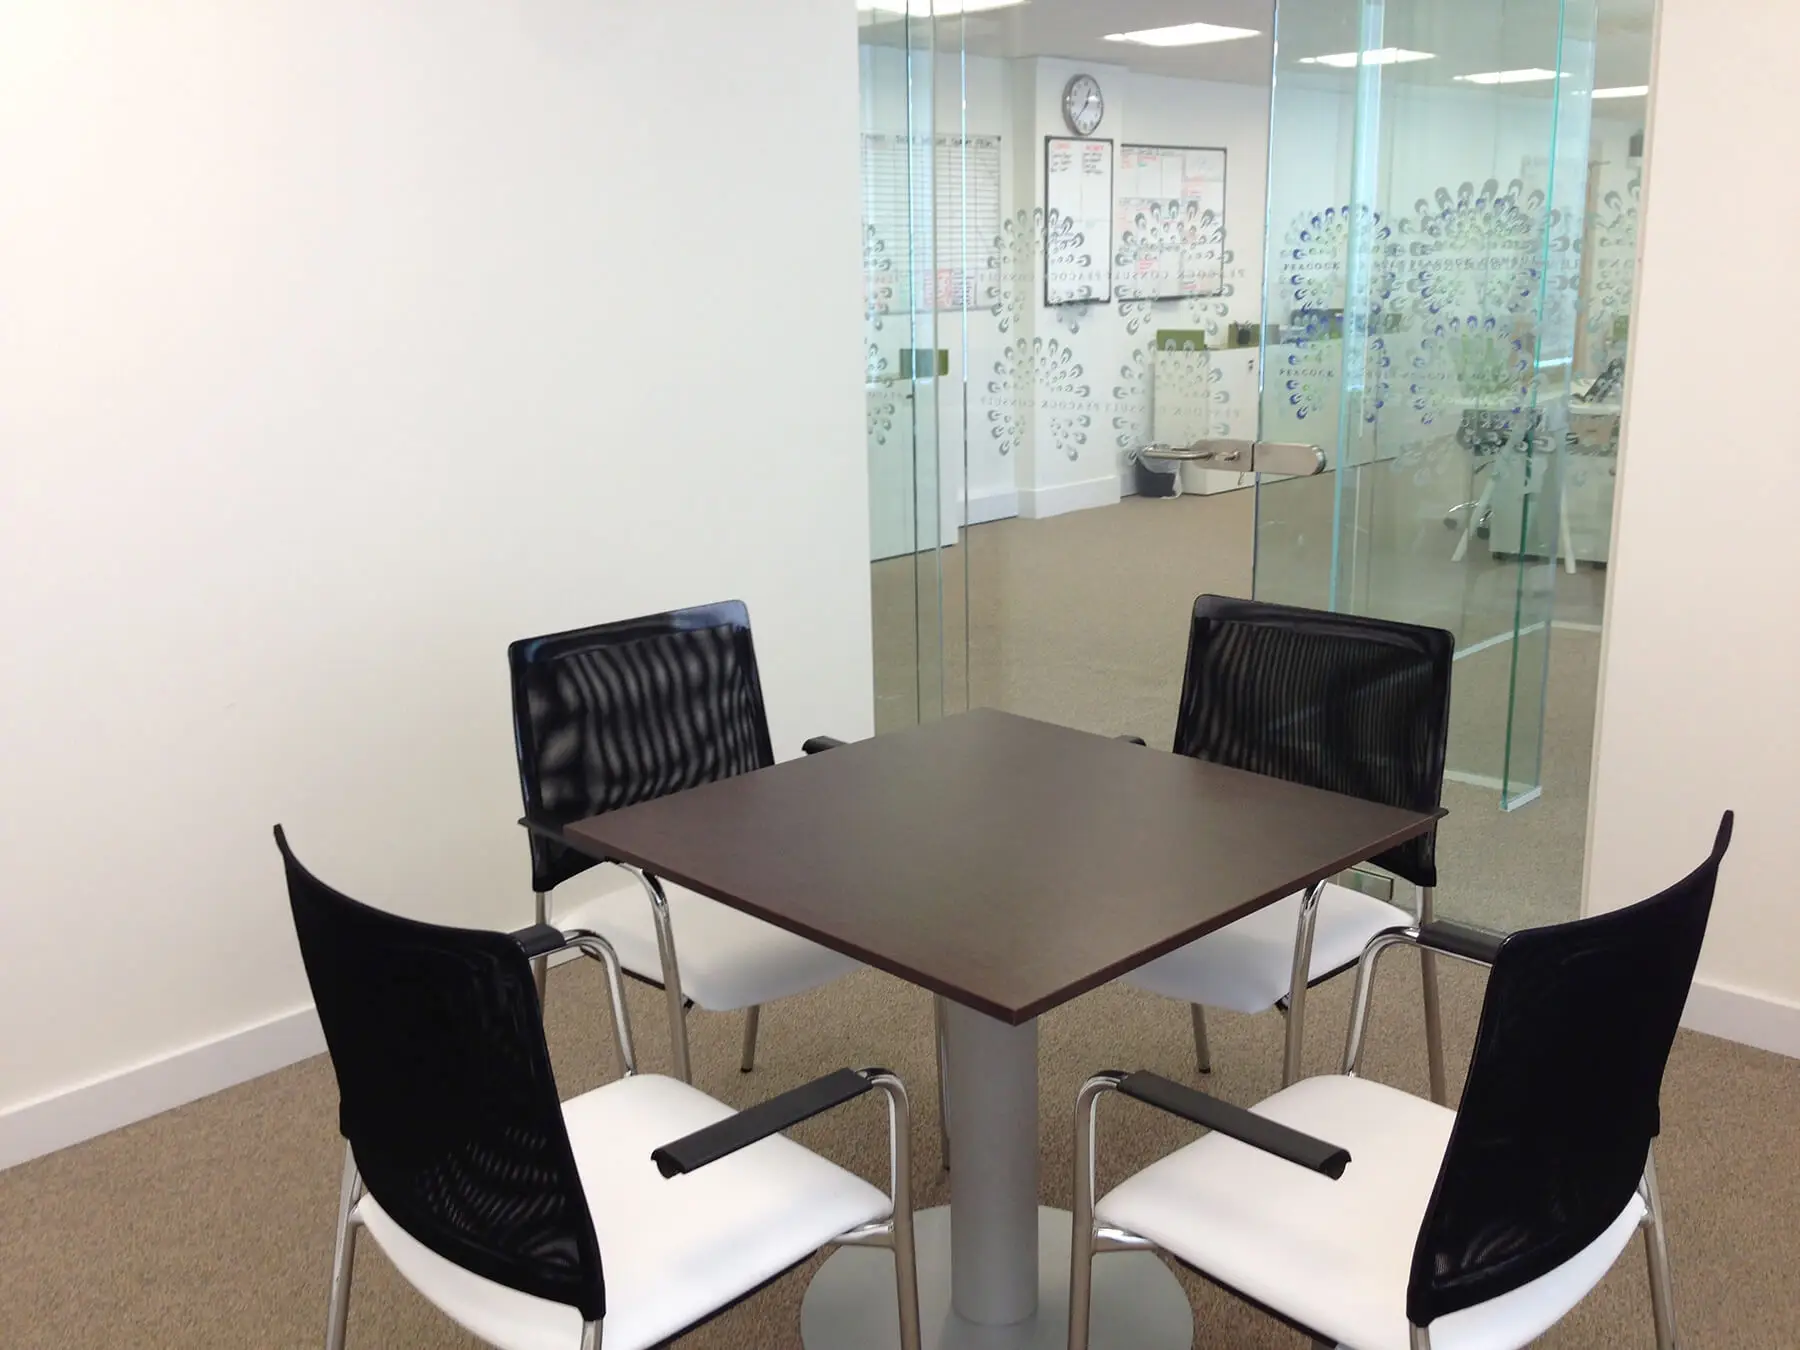 Meeting table with four chairs around it in glass partitioned meeting room